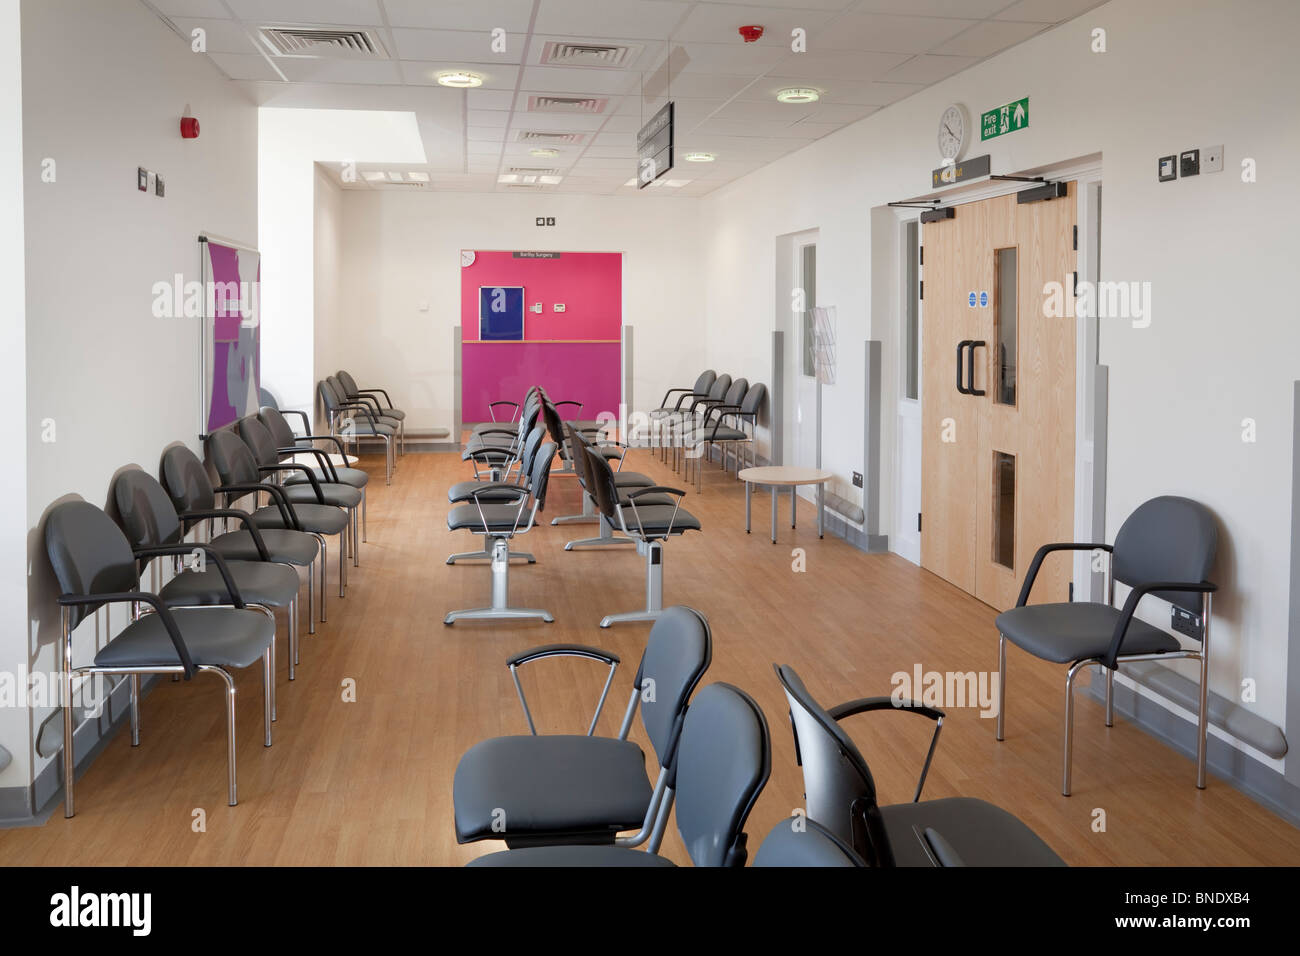 Unoccupied hospital large waiting room. Stock Photo